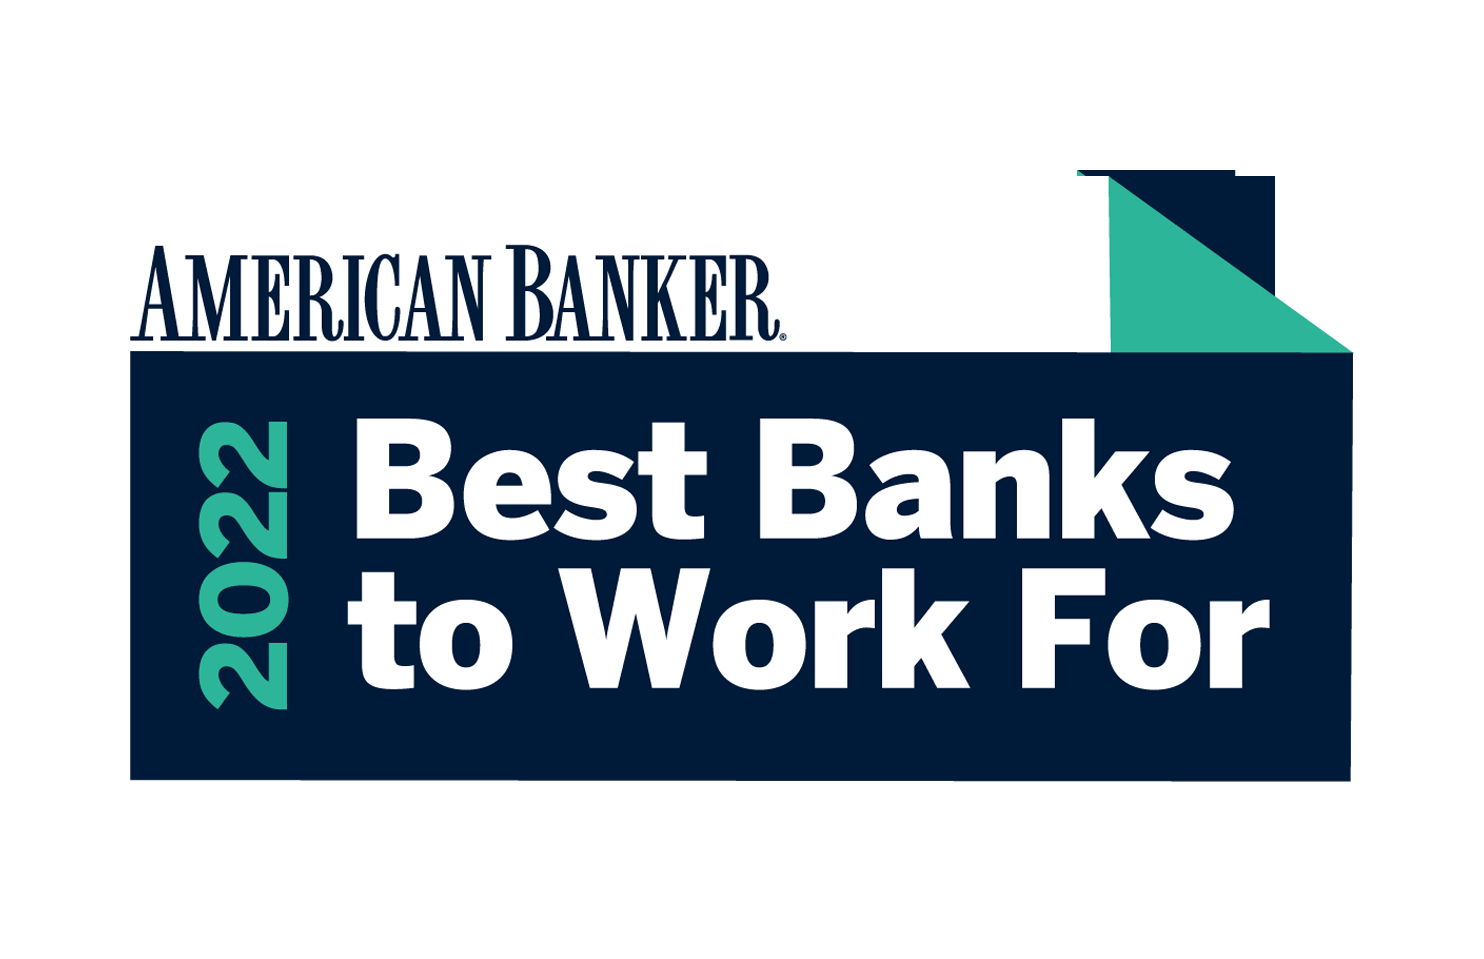 best banks to work for - FirstBank Southwest Chosen as a Recipient of the American Banker 'Best Banks to Work For' Award for 3 Years in a Row